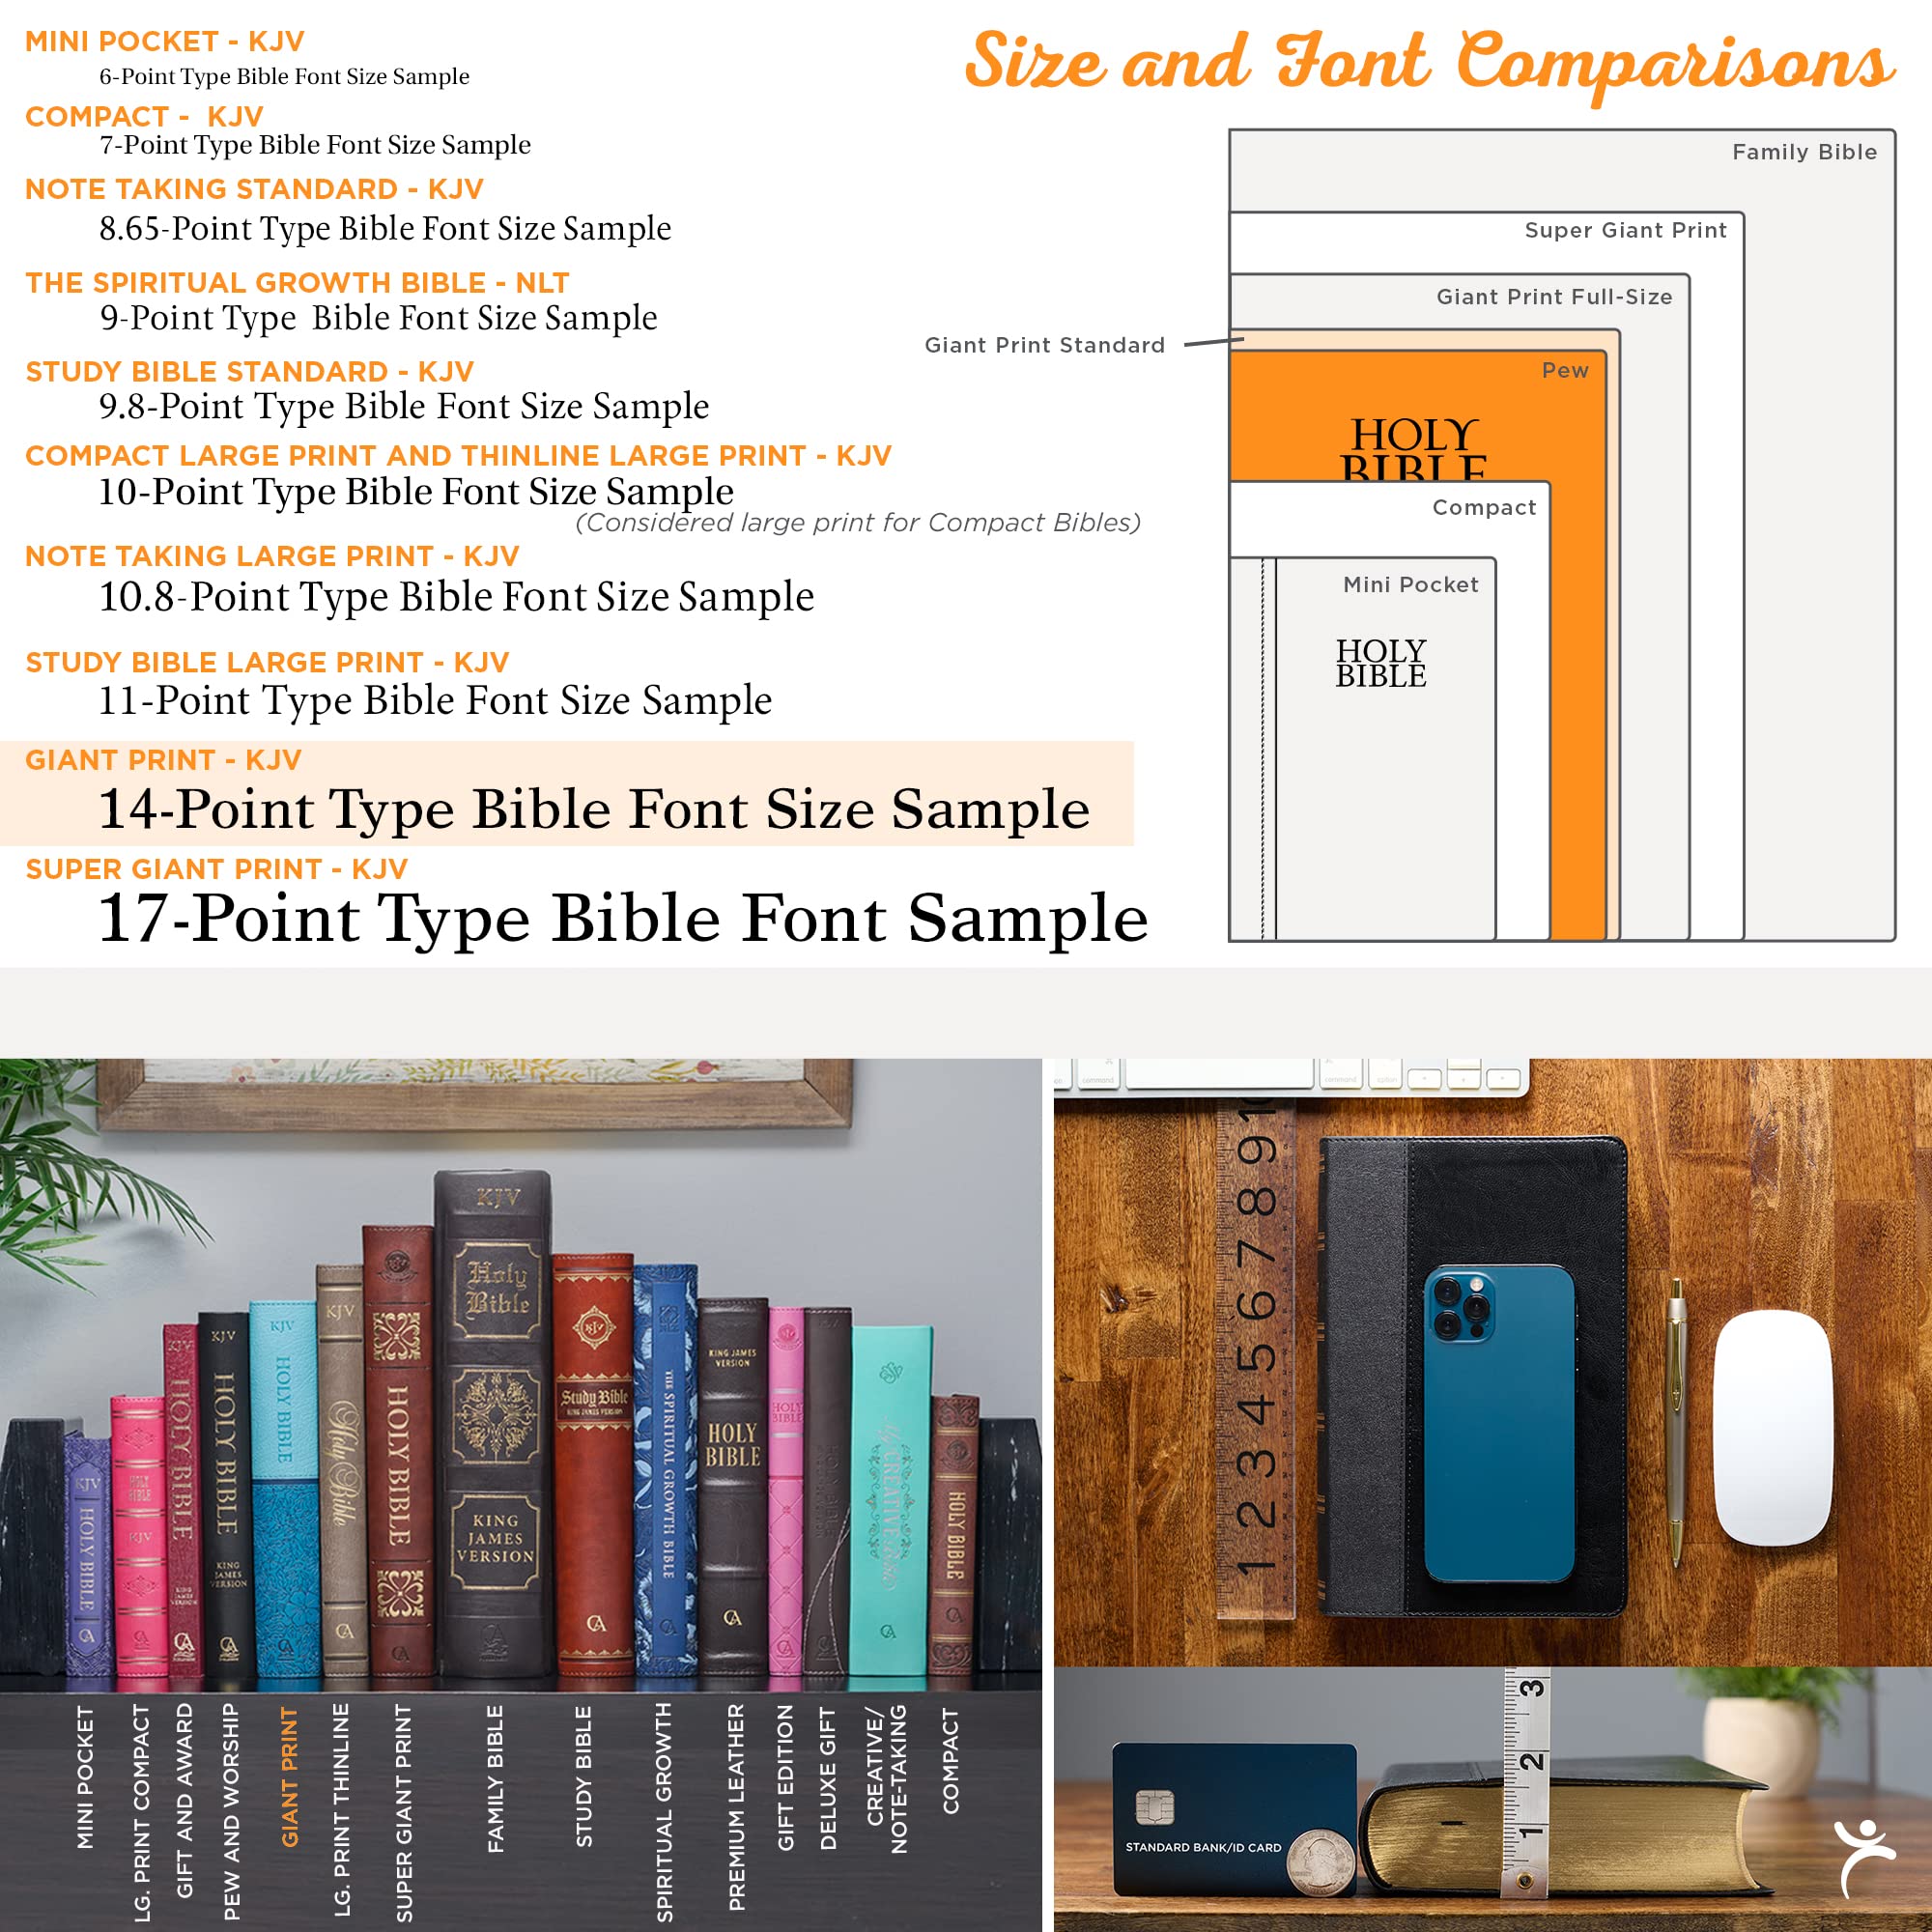 KJV Holy Bible, Giant Print Standard Size Faux Leather Red Letter Edition - Thumb Index & Ribbon Marker, King James Version, Dark Brown